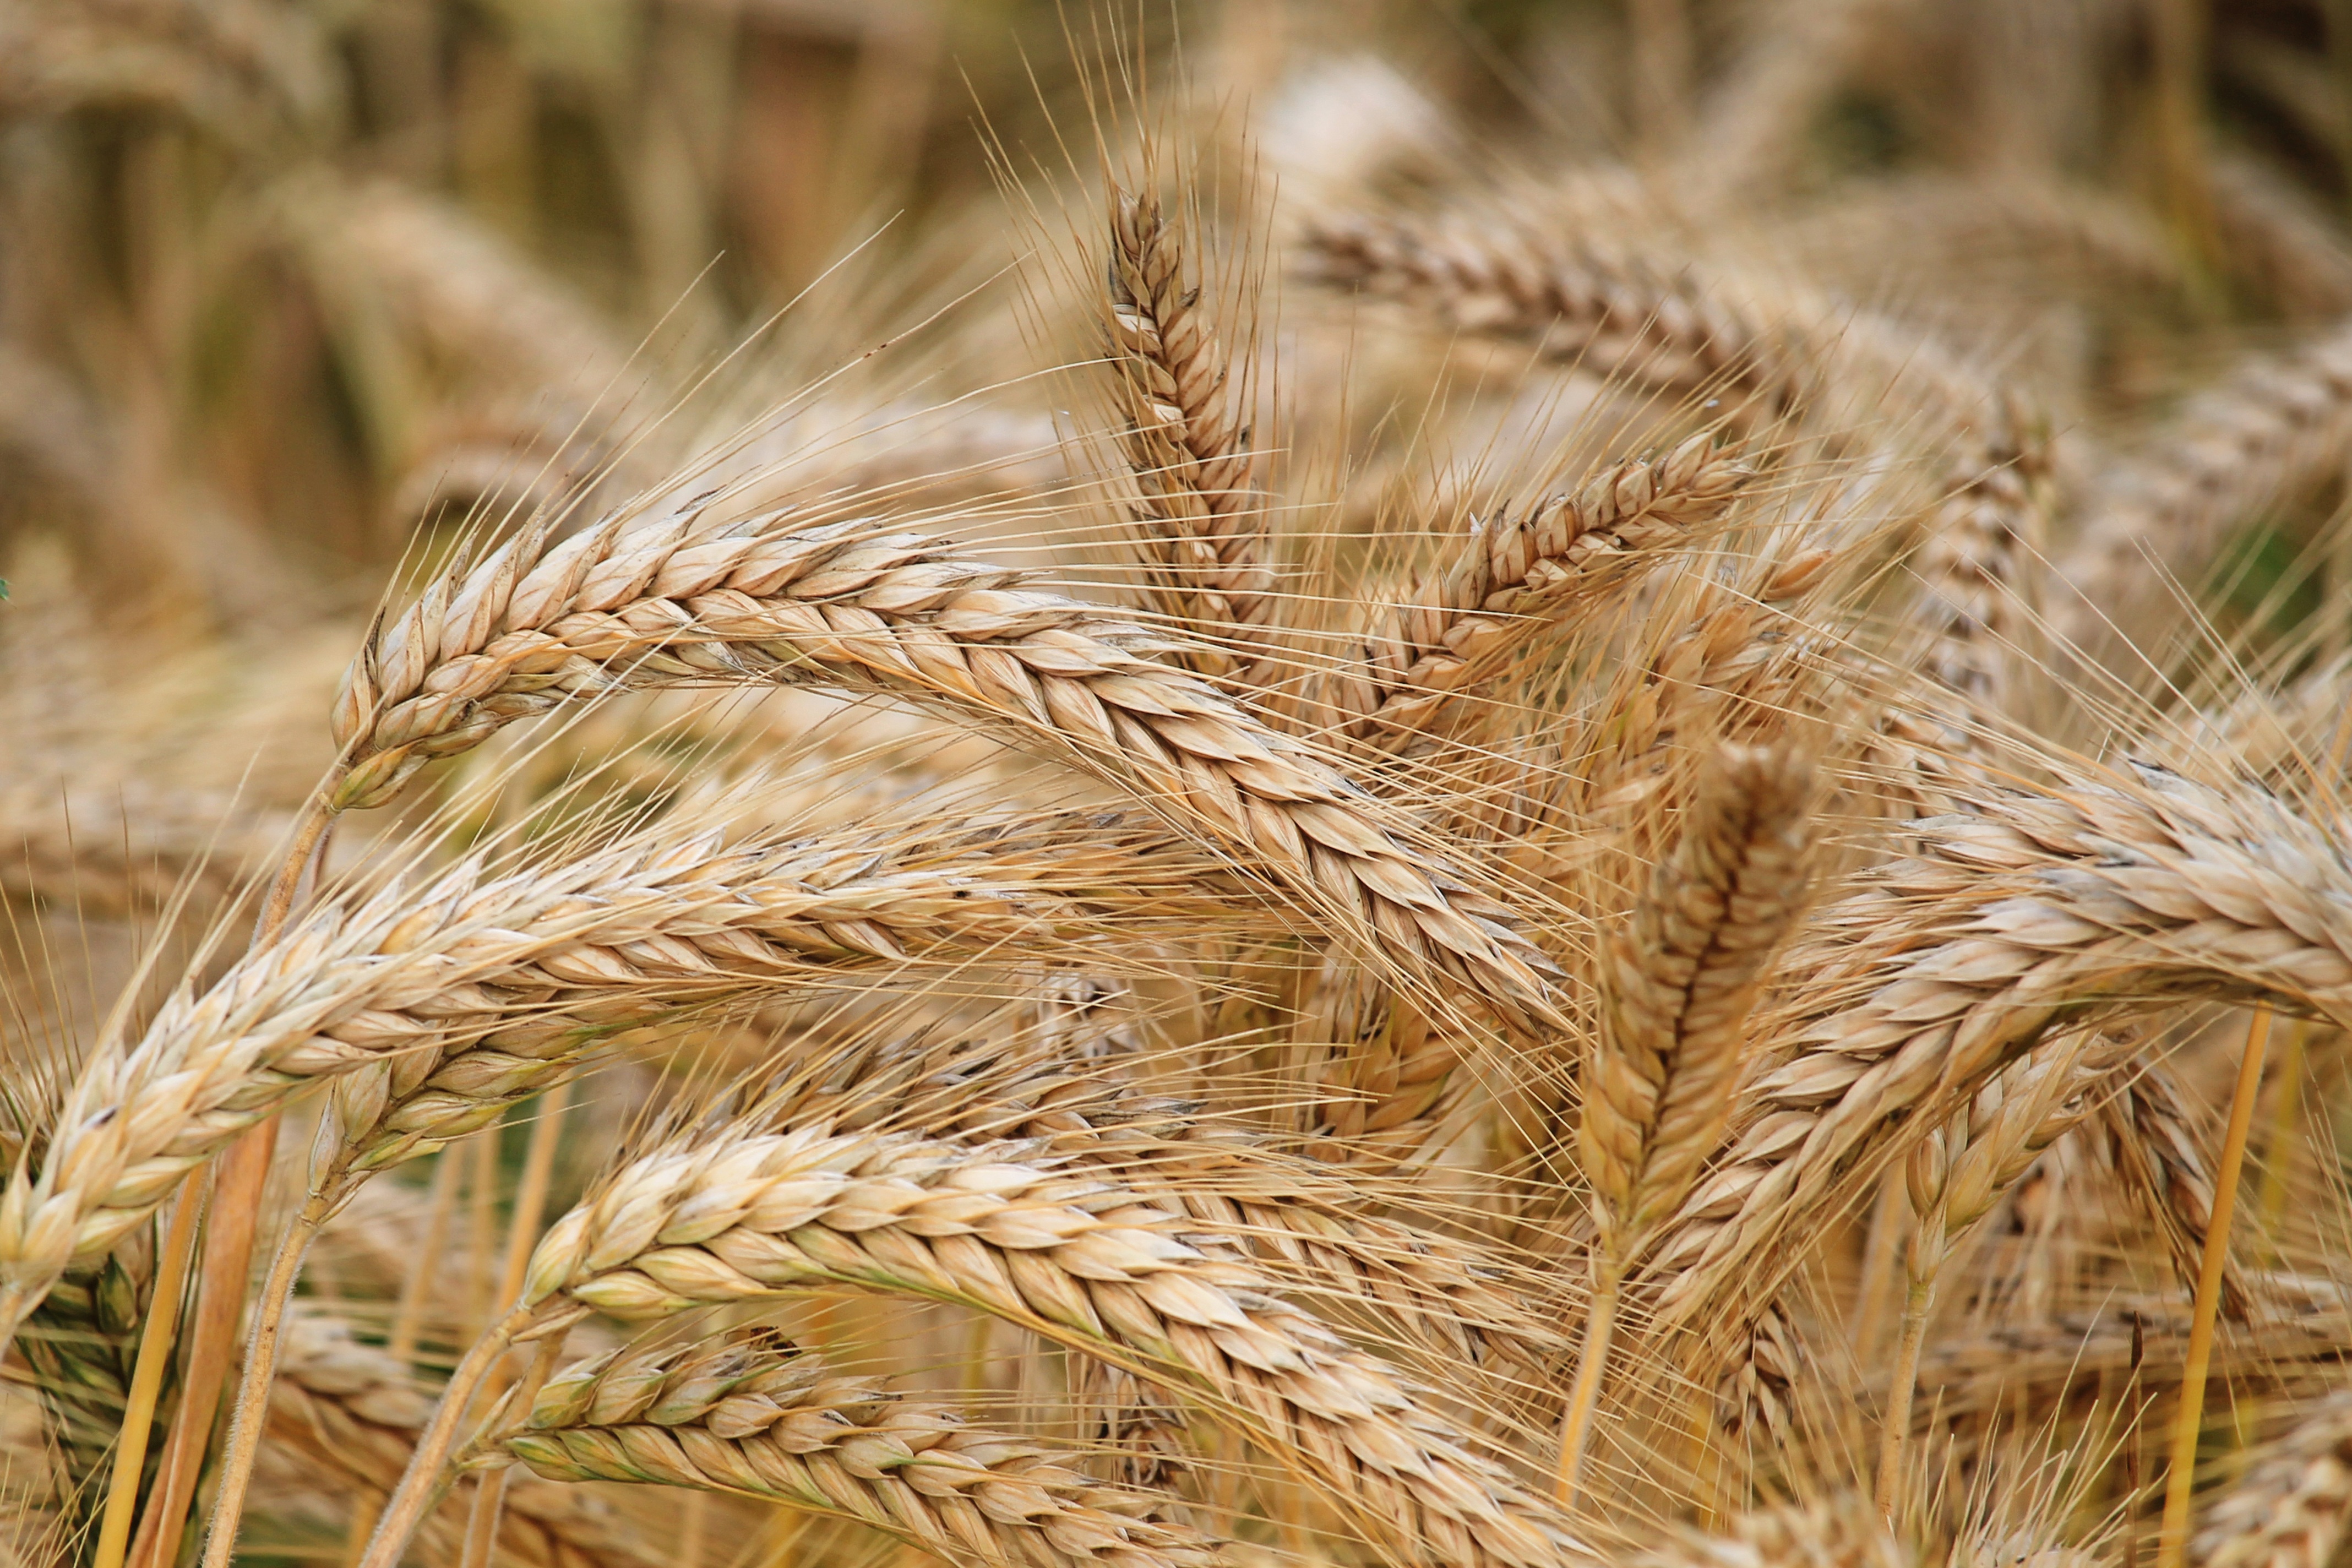 Wheat a kick in the guts for fighting diseases - Scimex